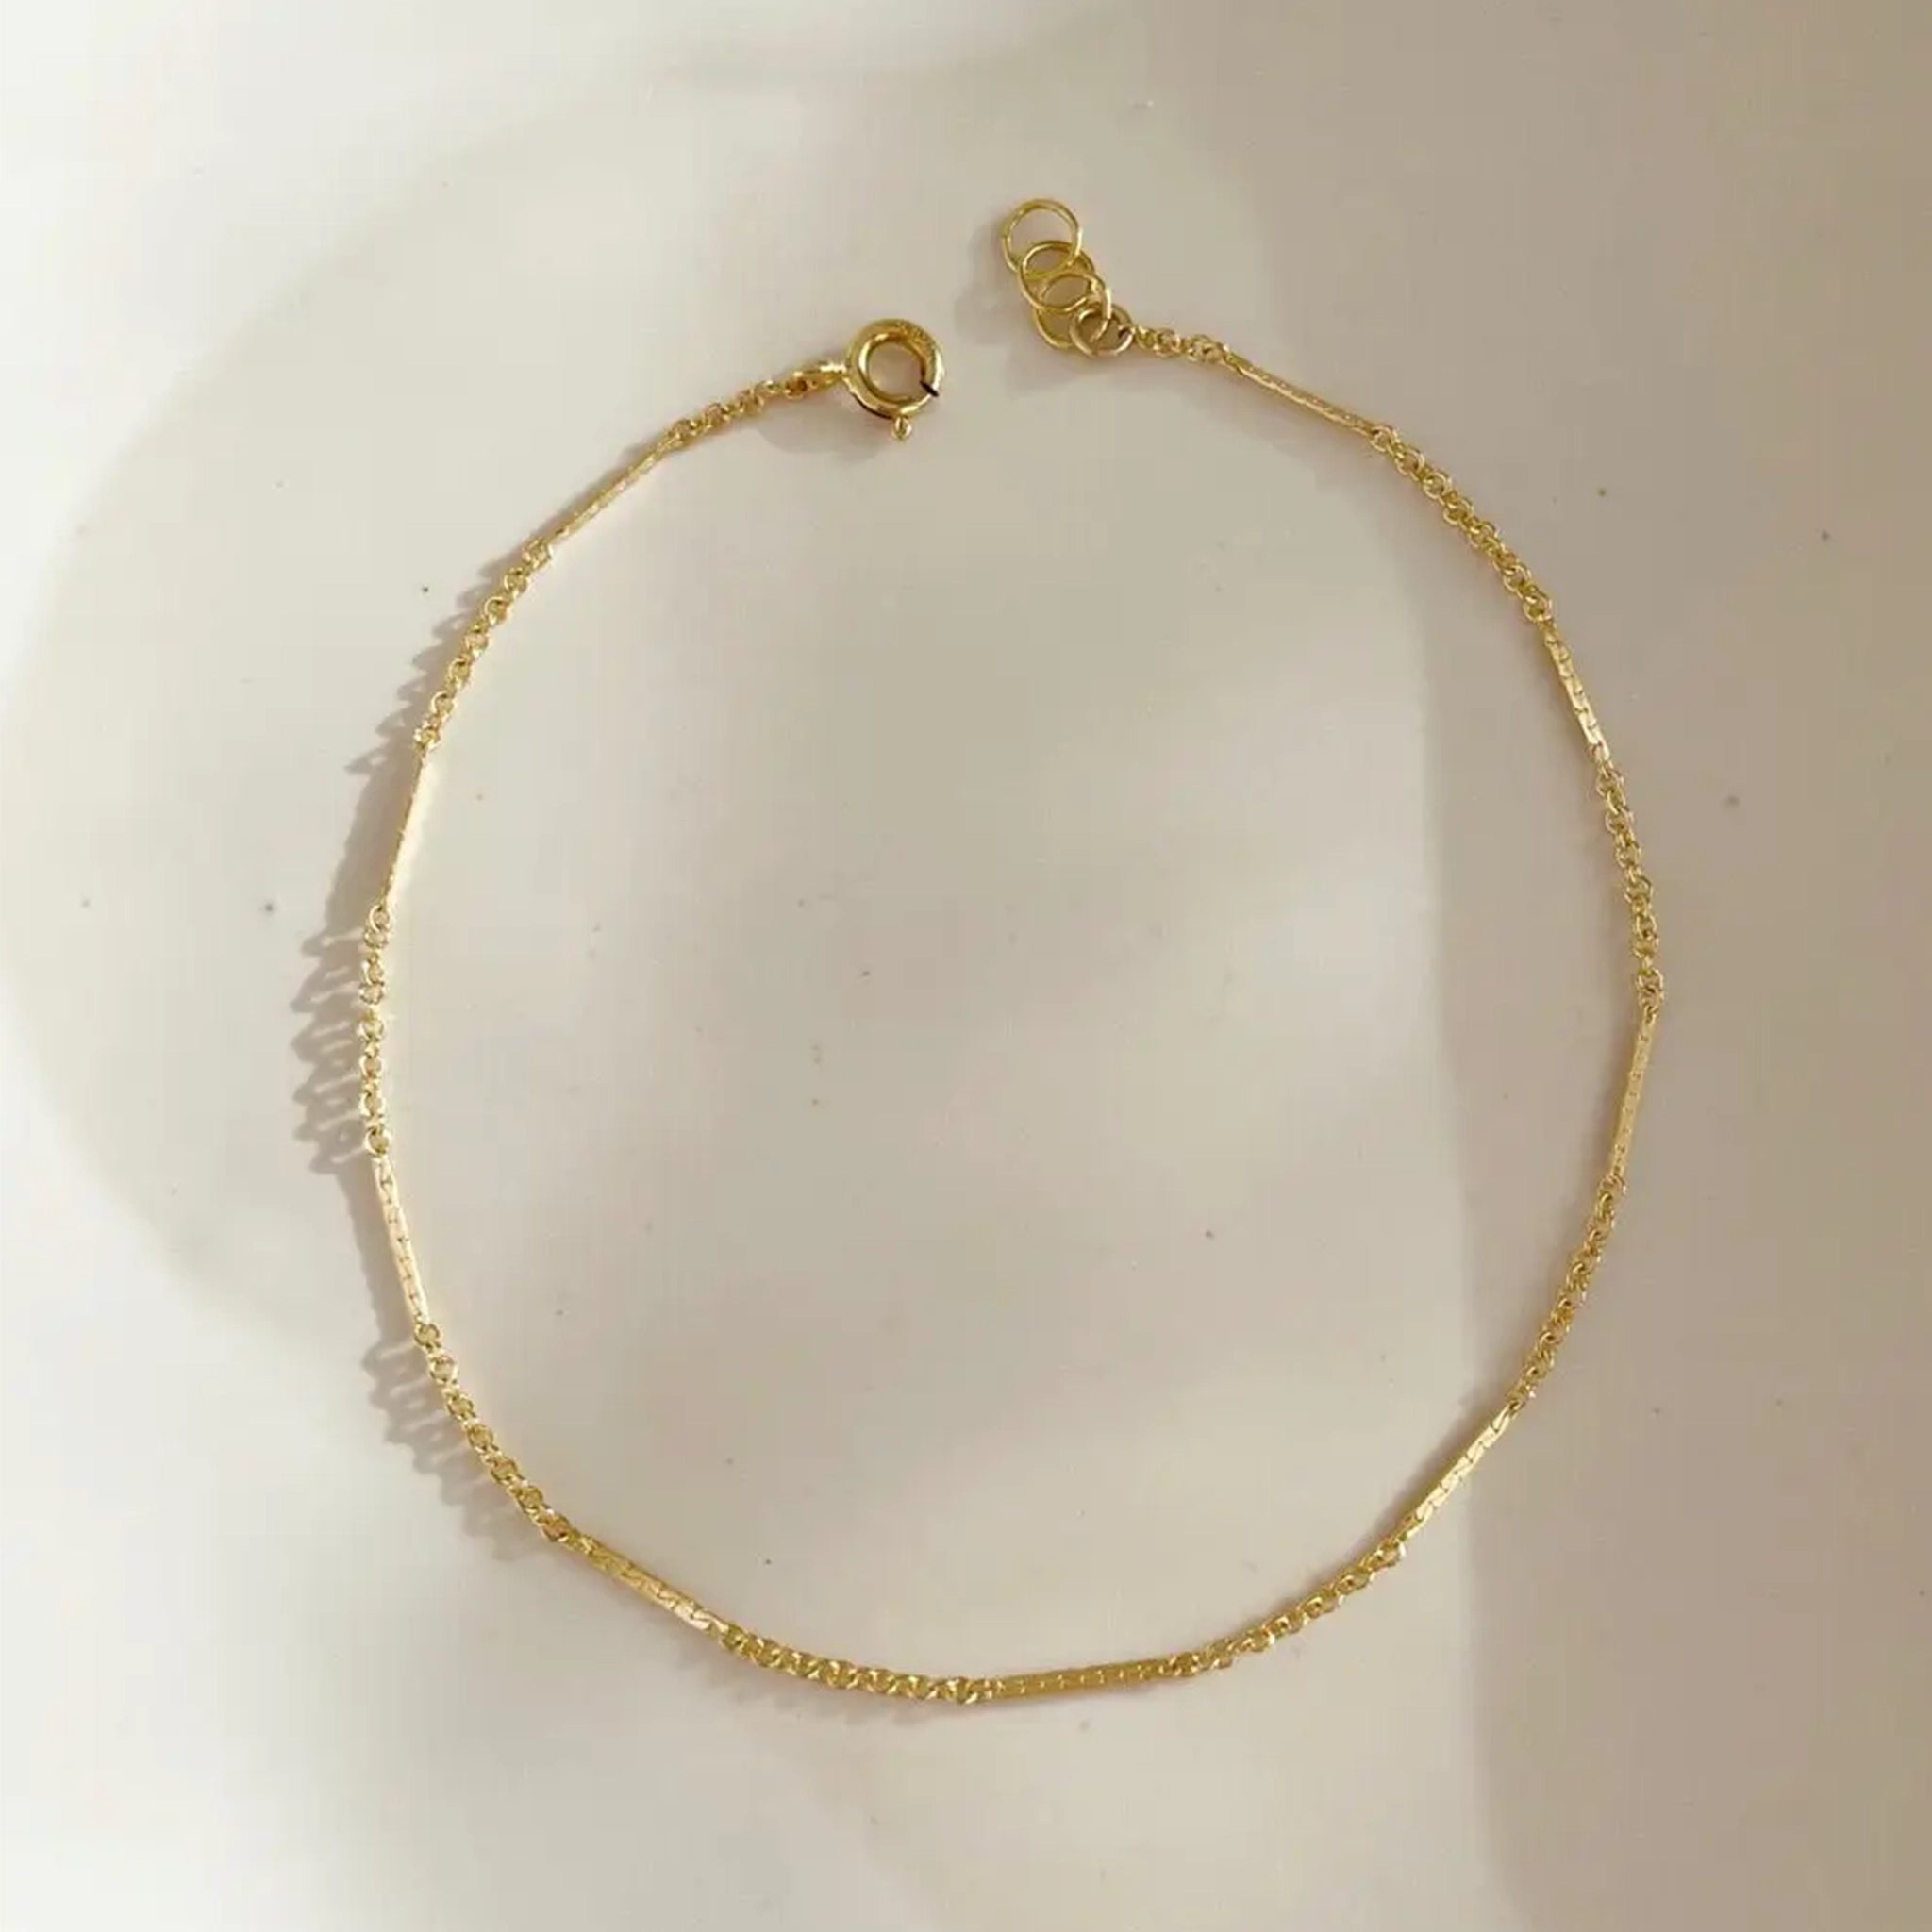 A gold chain bracelet with a round clasp at the end. 